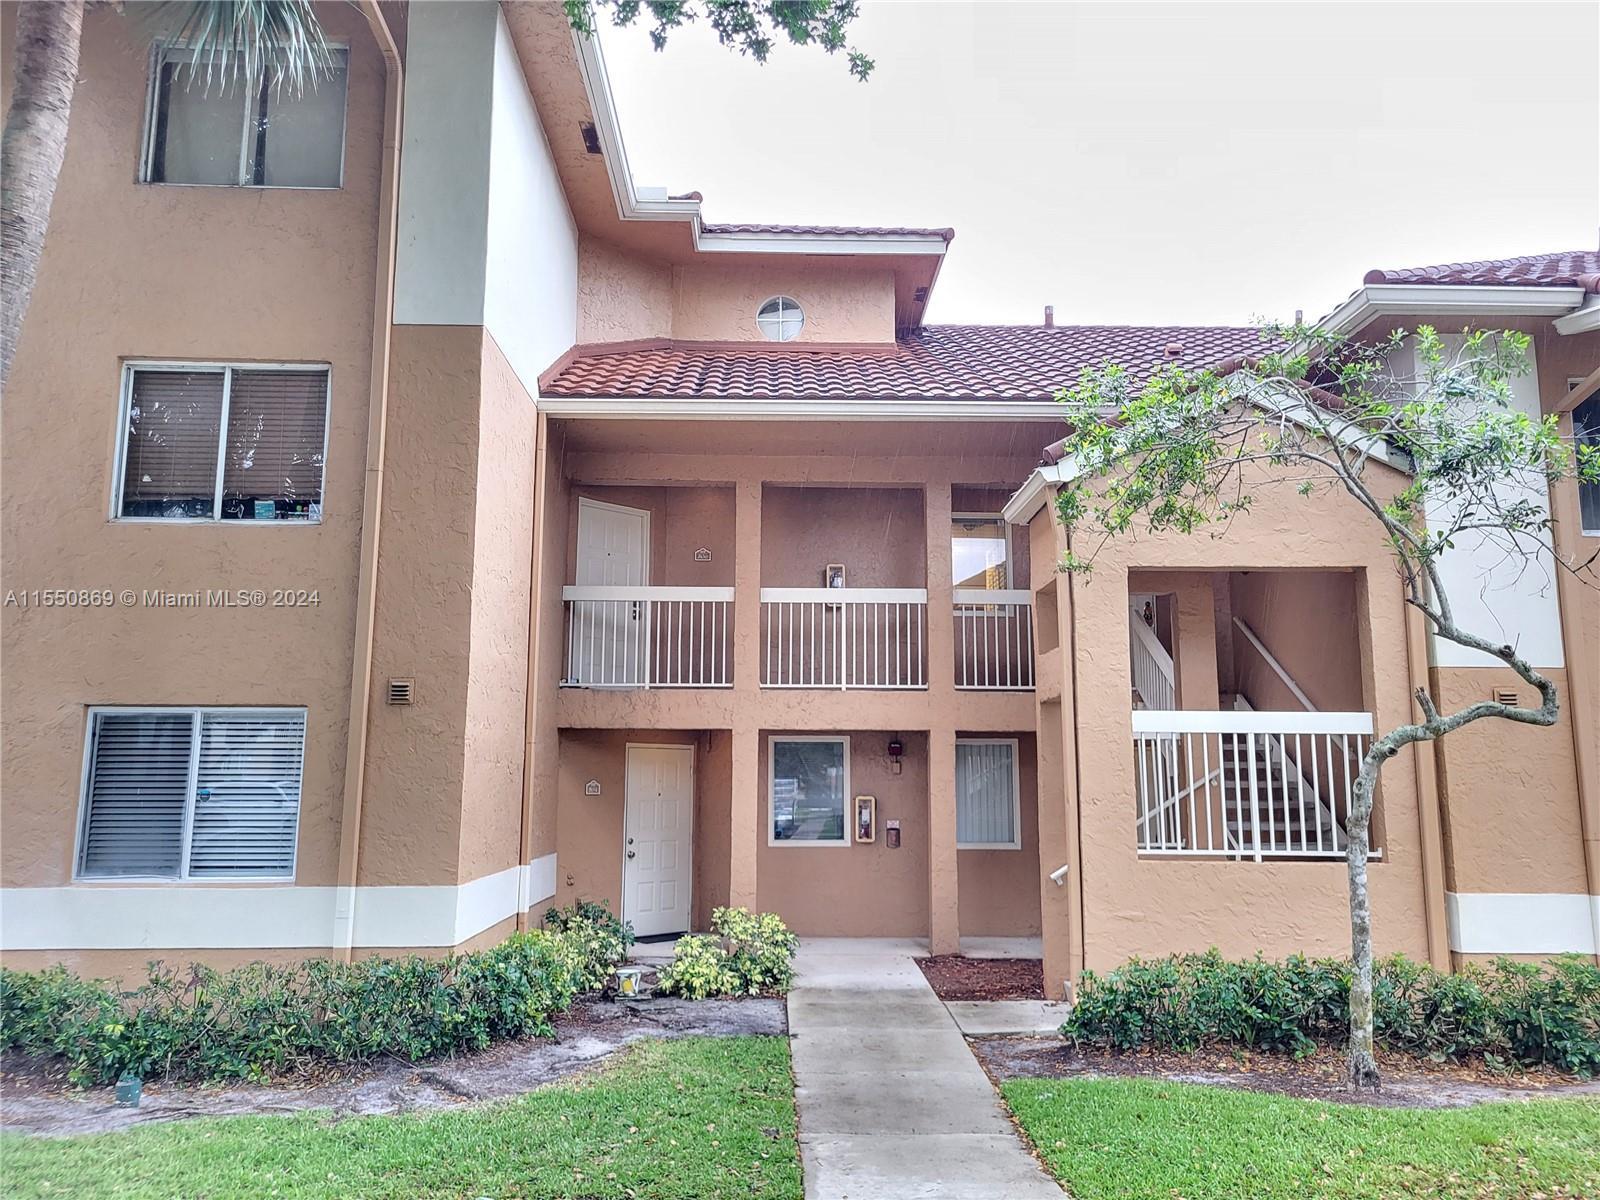 Photo of 804 NW 92 Ave #804 in Plantation, FL